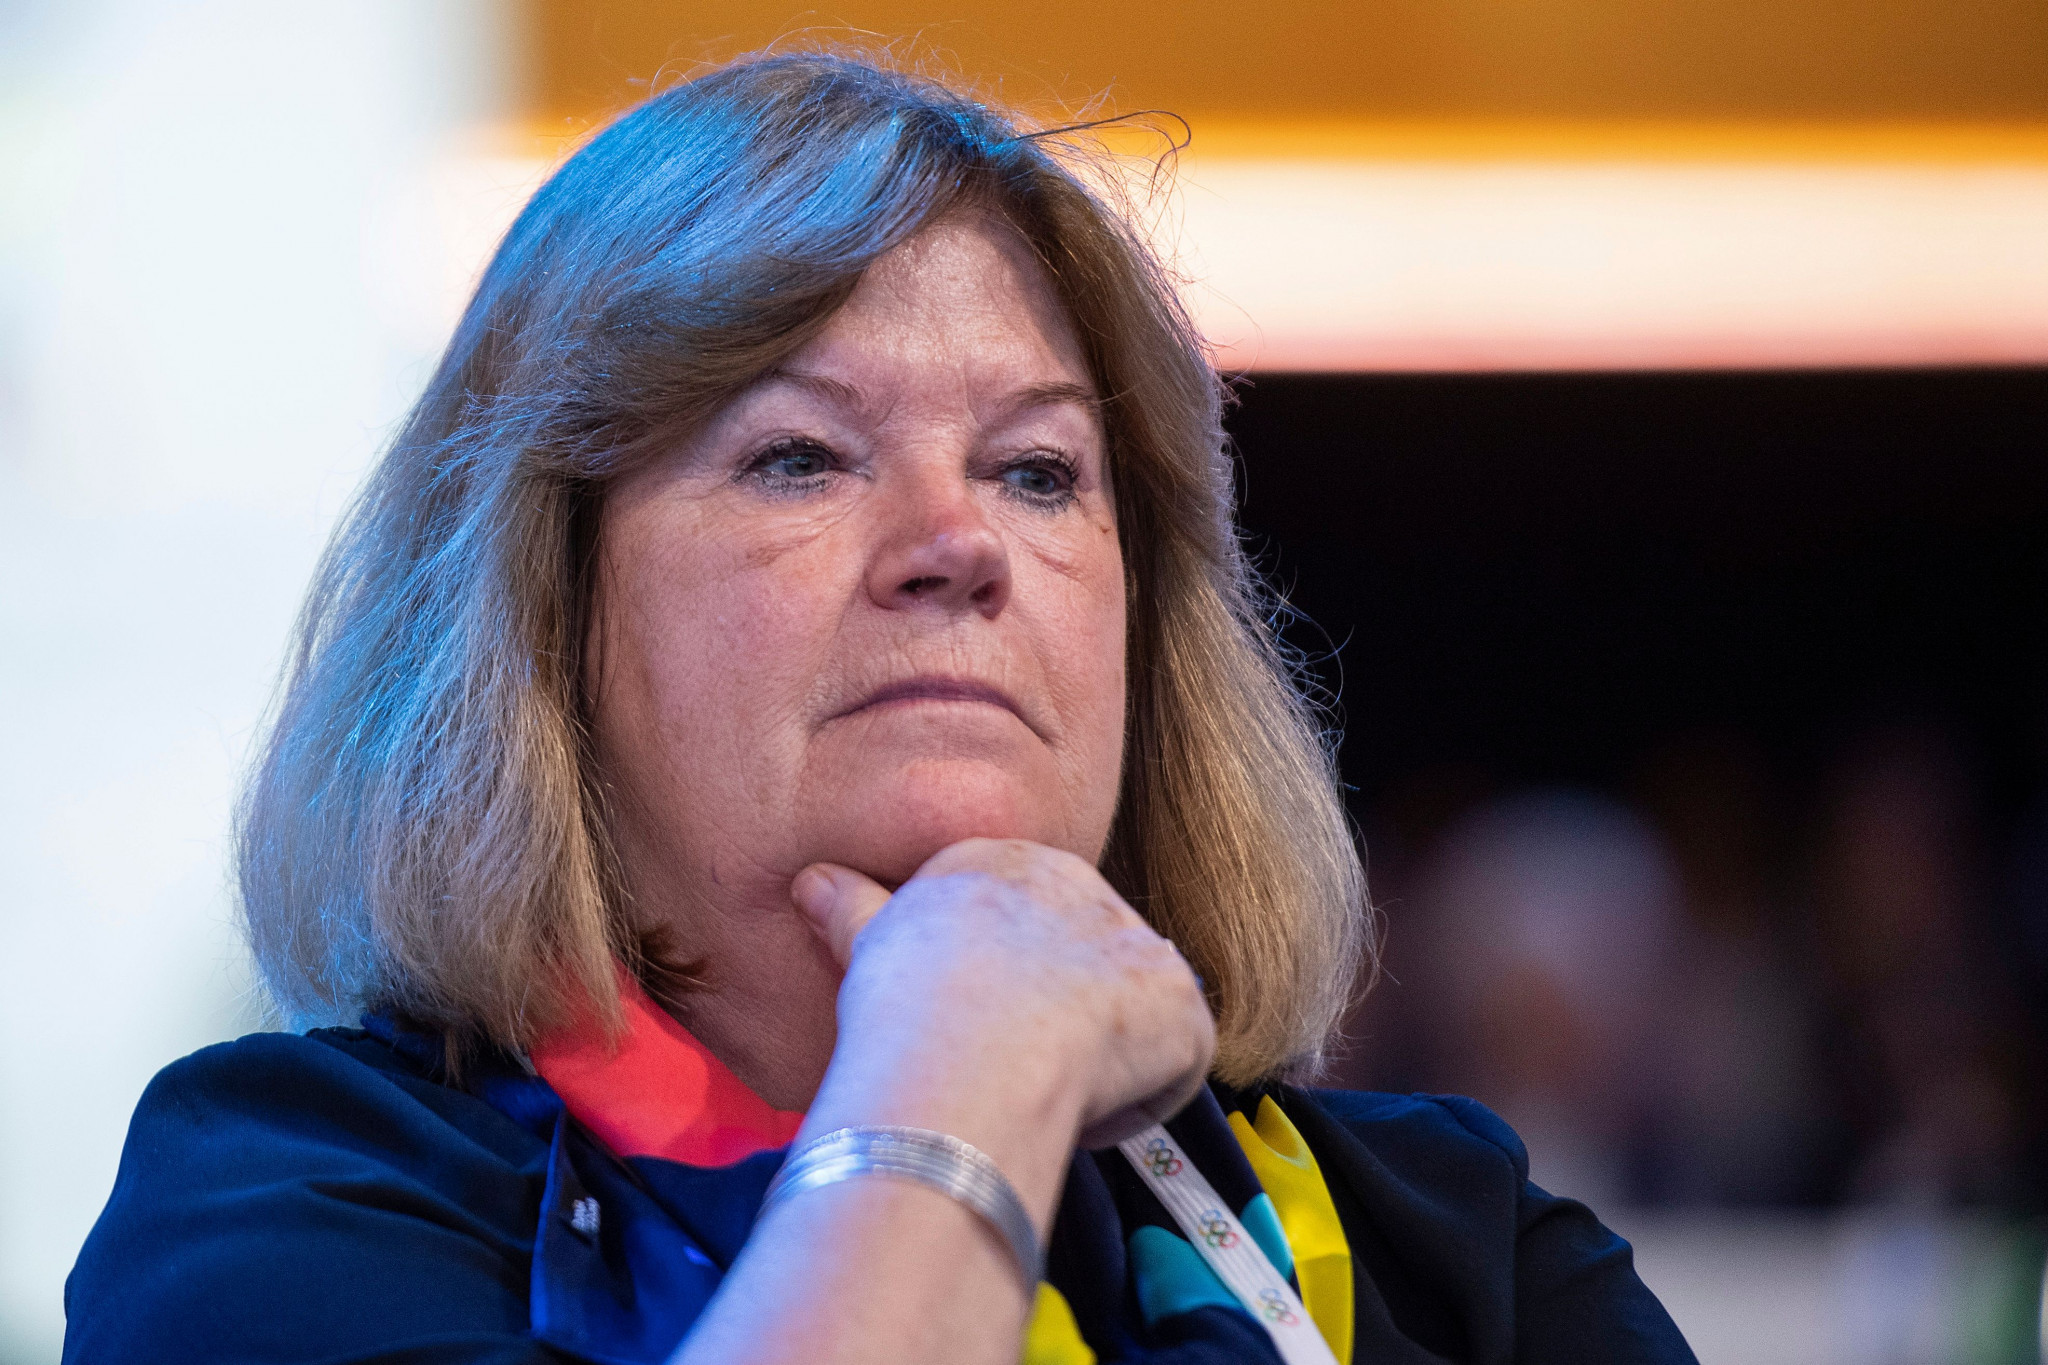 IOC member Gunilla Lindberg challenged the membership to prove the New Norm reforms were not just talk by choosing Stockholm Åre 2026 to host the Winter Olympic and Paralympic Games ©Getty Images